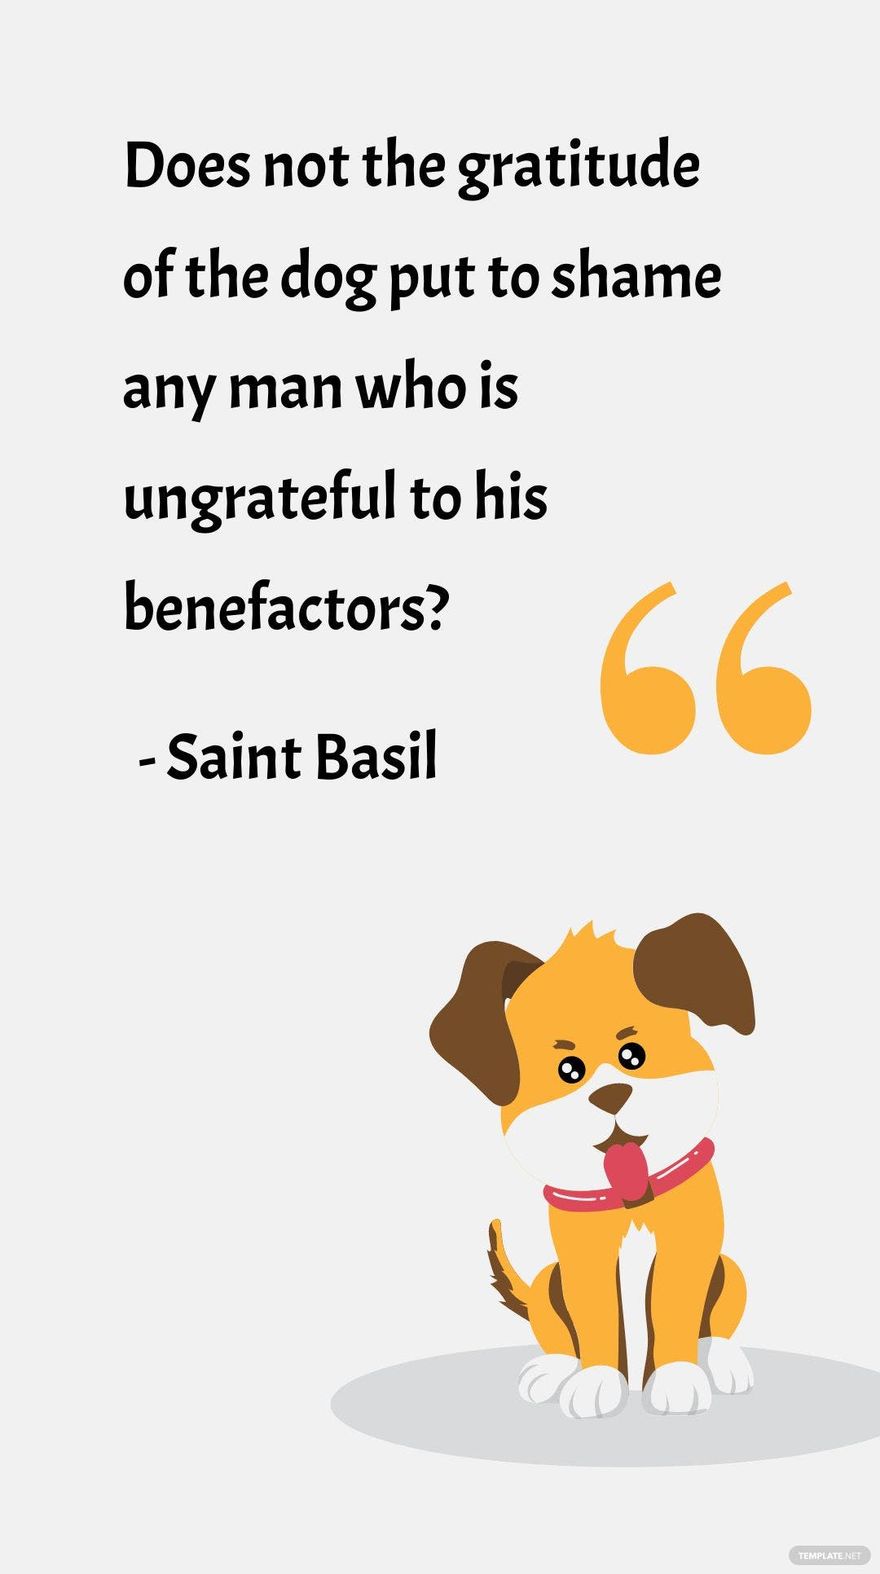 Saint Basil - Does not the gratitude of the dog put to shame any man who is ungrateful to his benefactors?